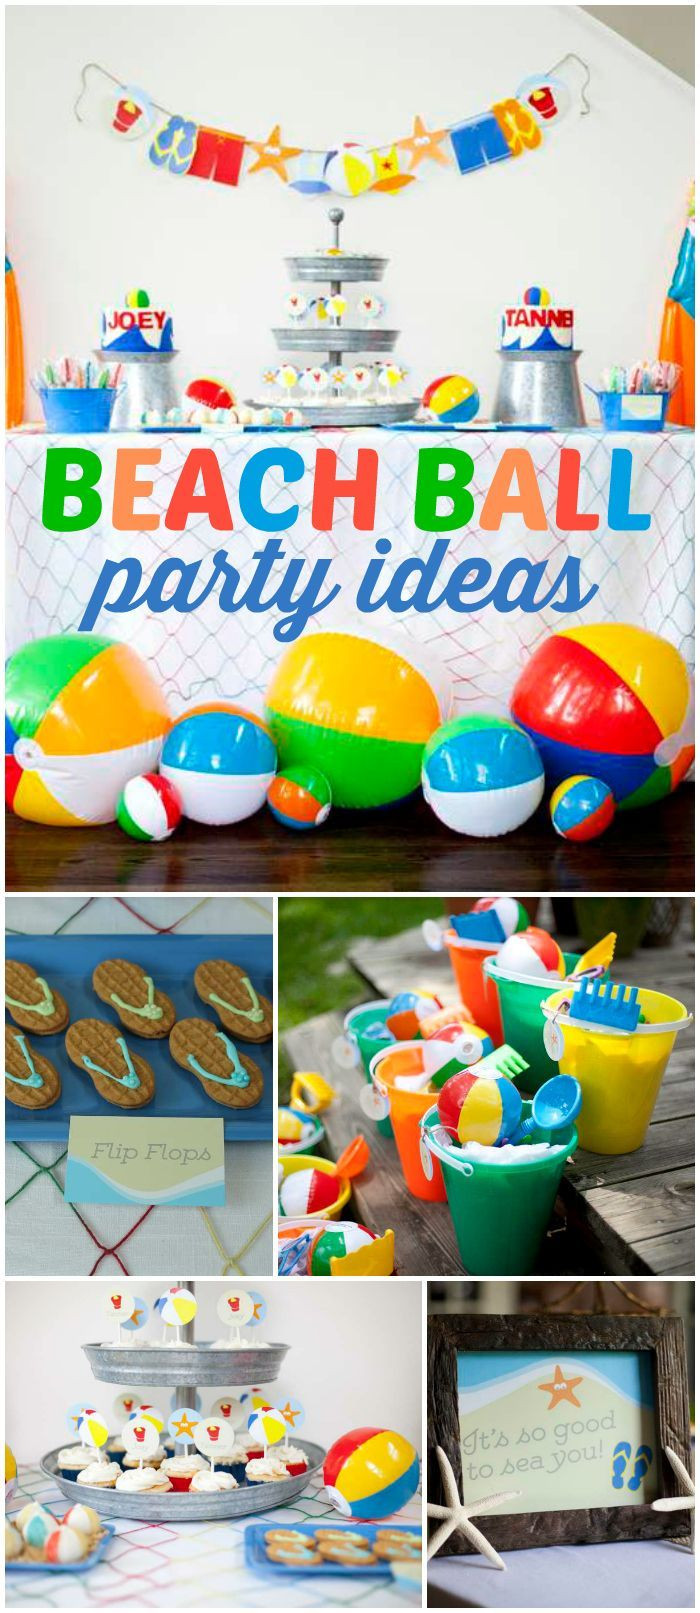 Boy Beach Birthday Party Ideas
 Lots of colorful beach balls are at this fun party See